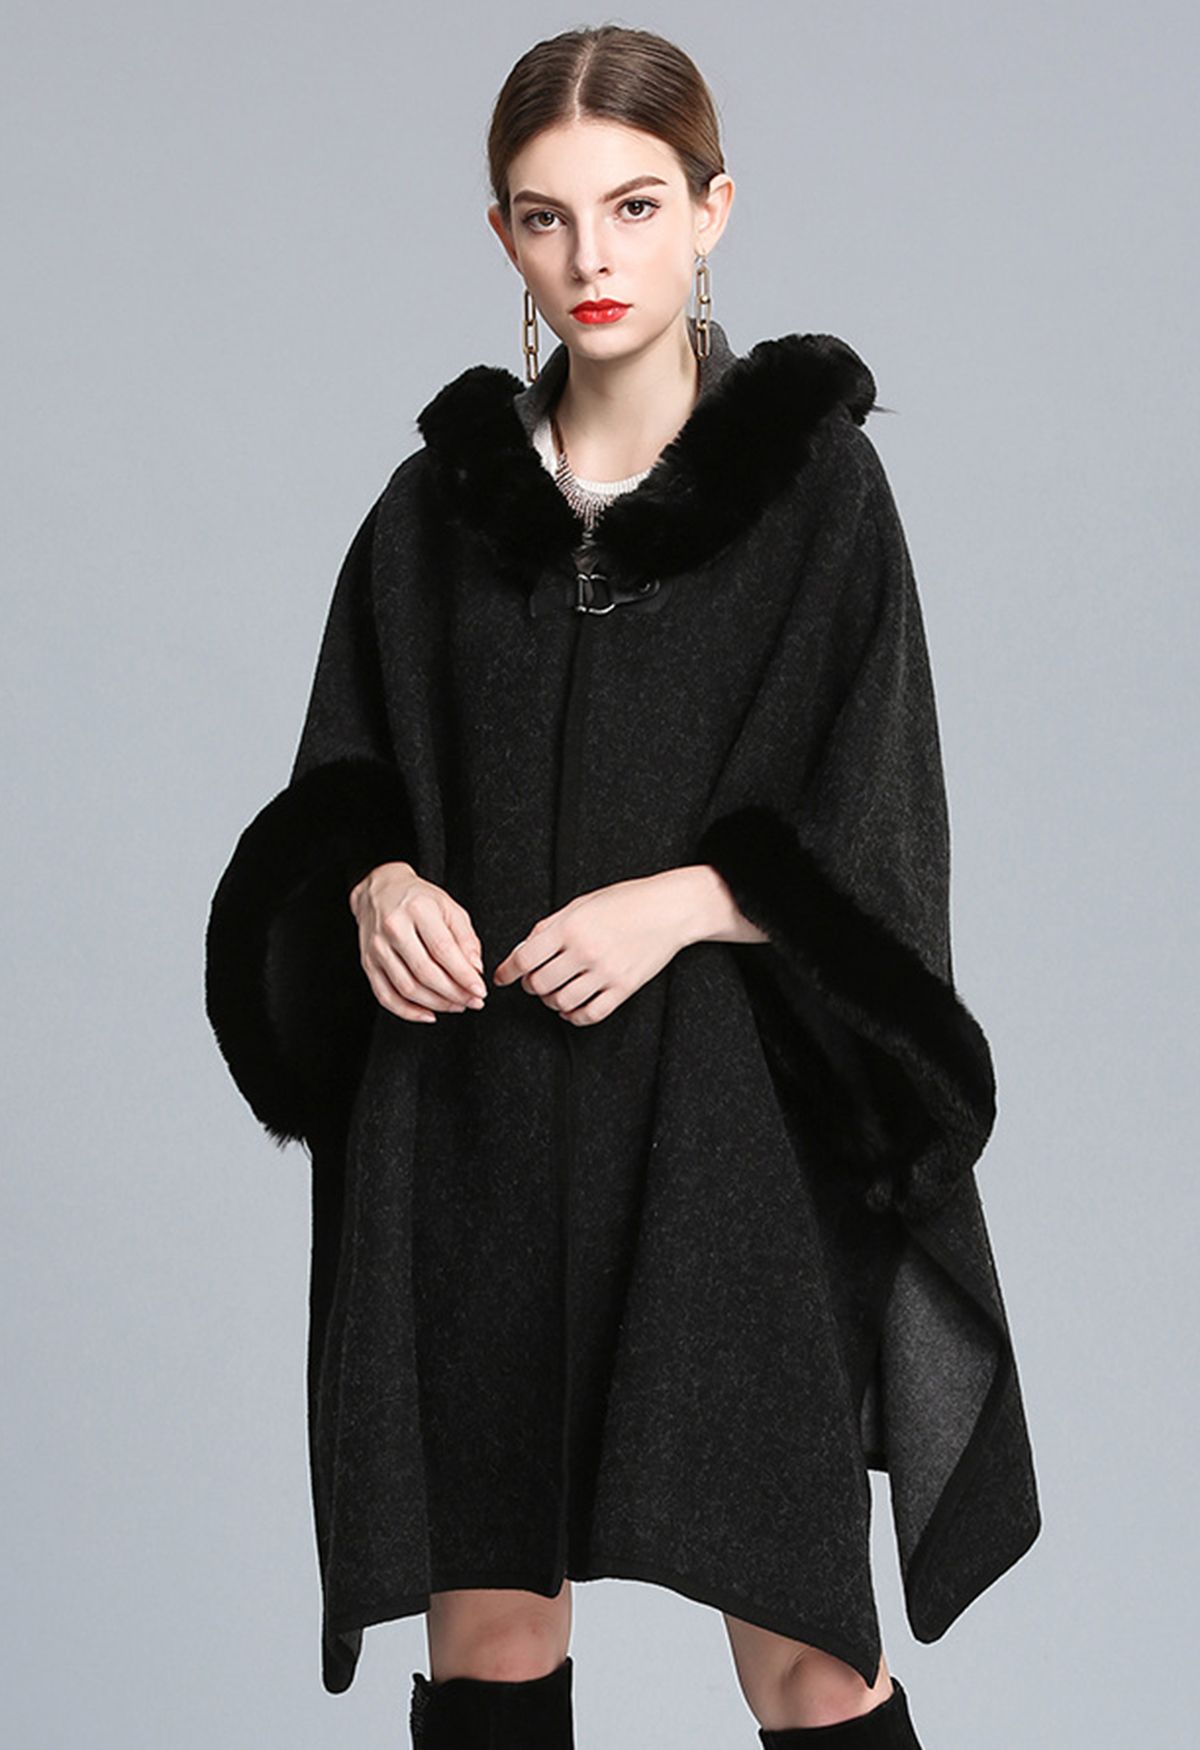 Cozy Faux Fur Hooded Poncho in Black - Retro, Indie and Unique Fashion